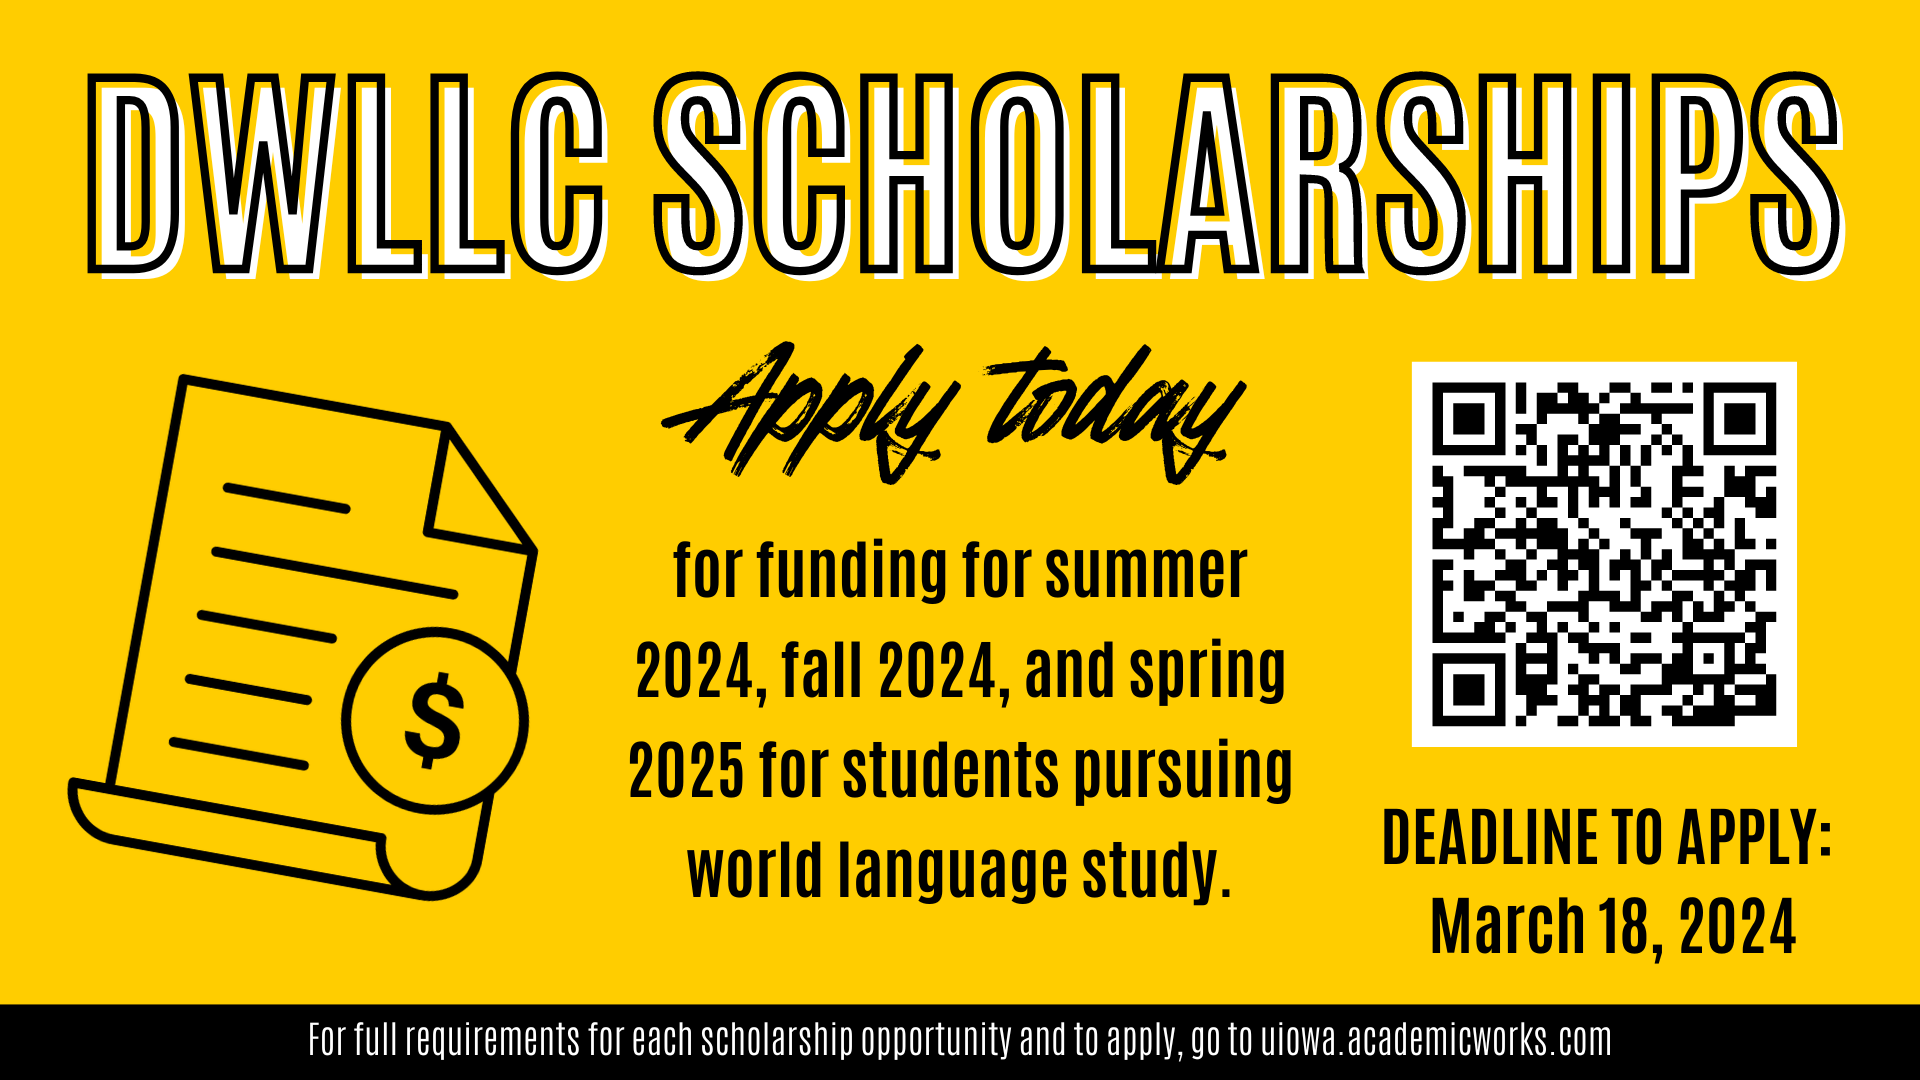 DWLLC Scholarships - Apply today for funding for Summer 2024, Fall 2024, and Spring 2025 for students pursing world language study. - Deadline to Apply: March 18, 2024